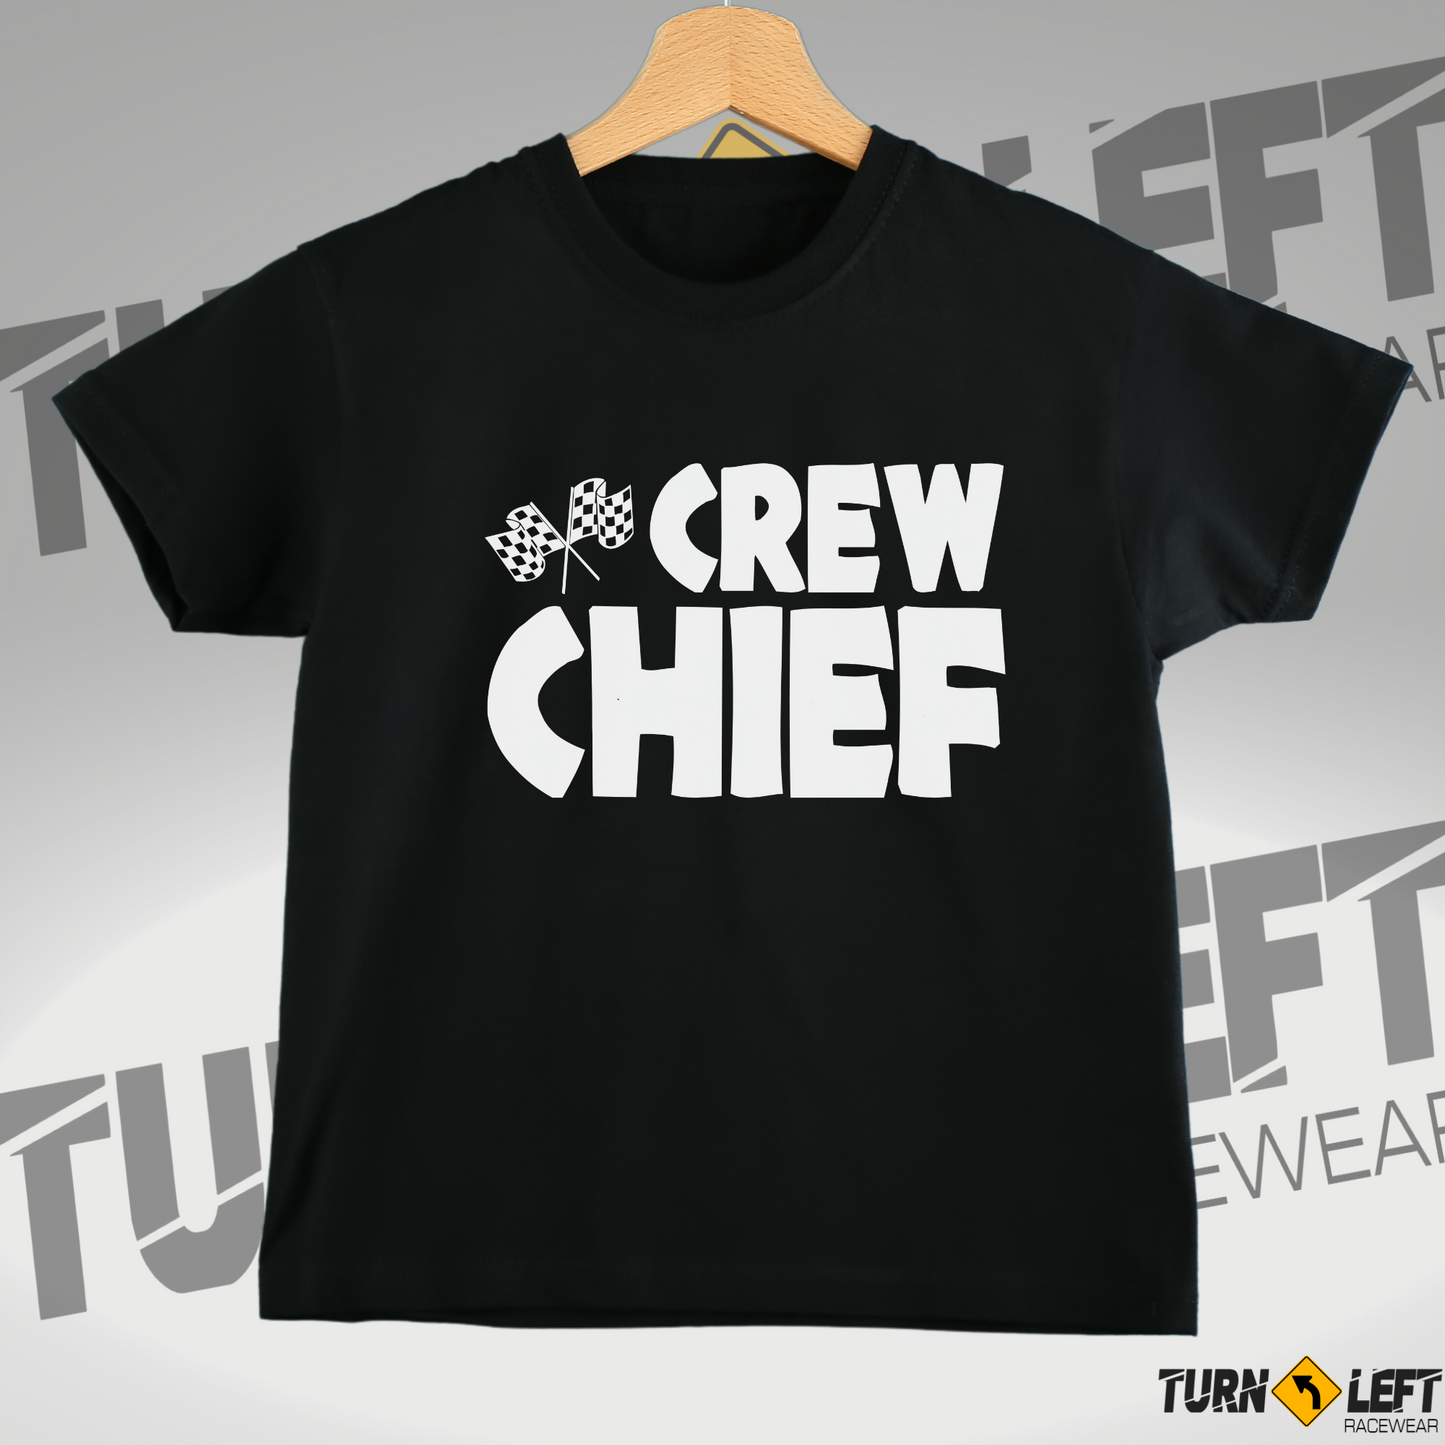 Toddler Crew Chief T-shirts. Racing Pit Crew Shirts for Kids